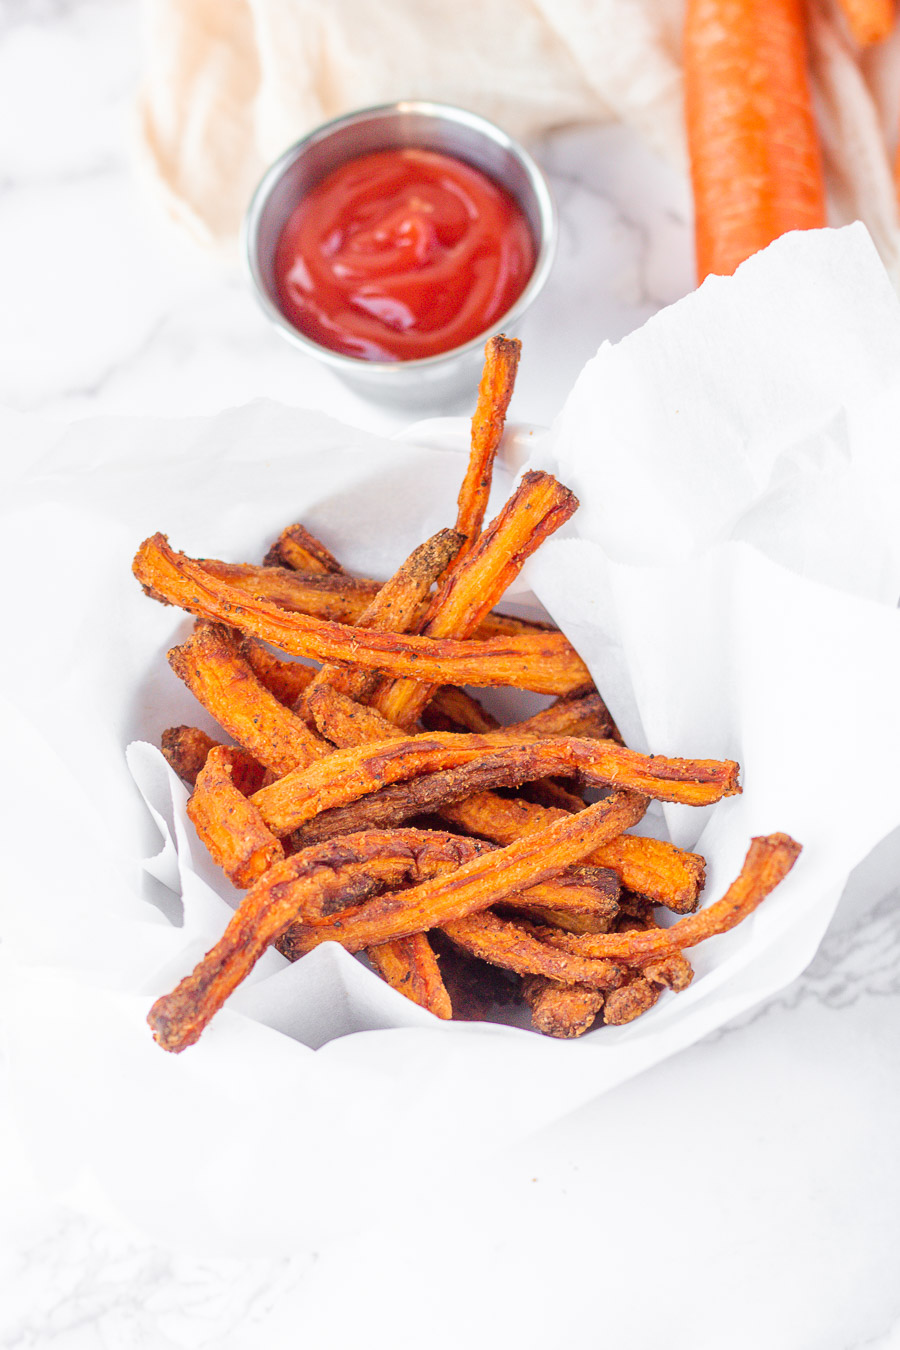 These healthy air fryer carrot fries are one of the best air fryer fries recipes. They are perfect for any weeknight dinner side dish recipe, and are one of the easiest ways to cook carrots!